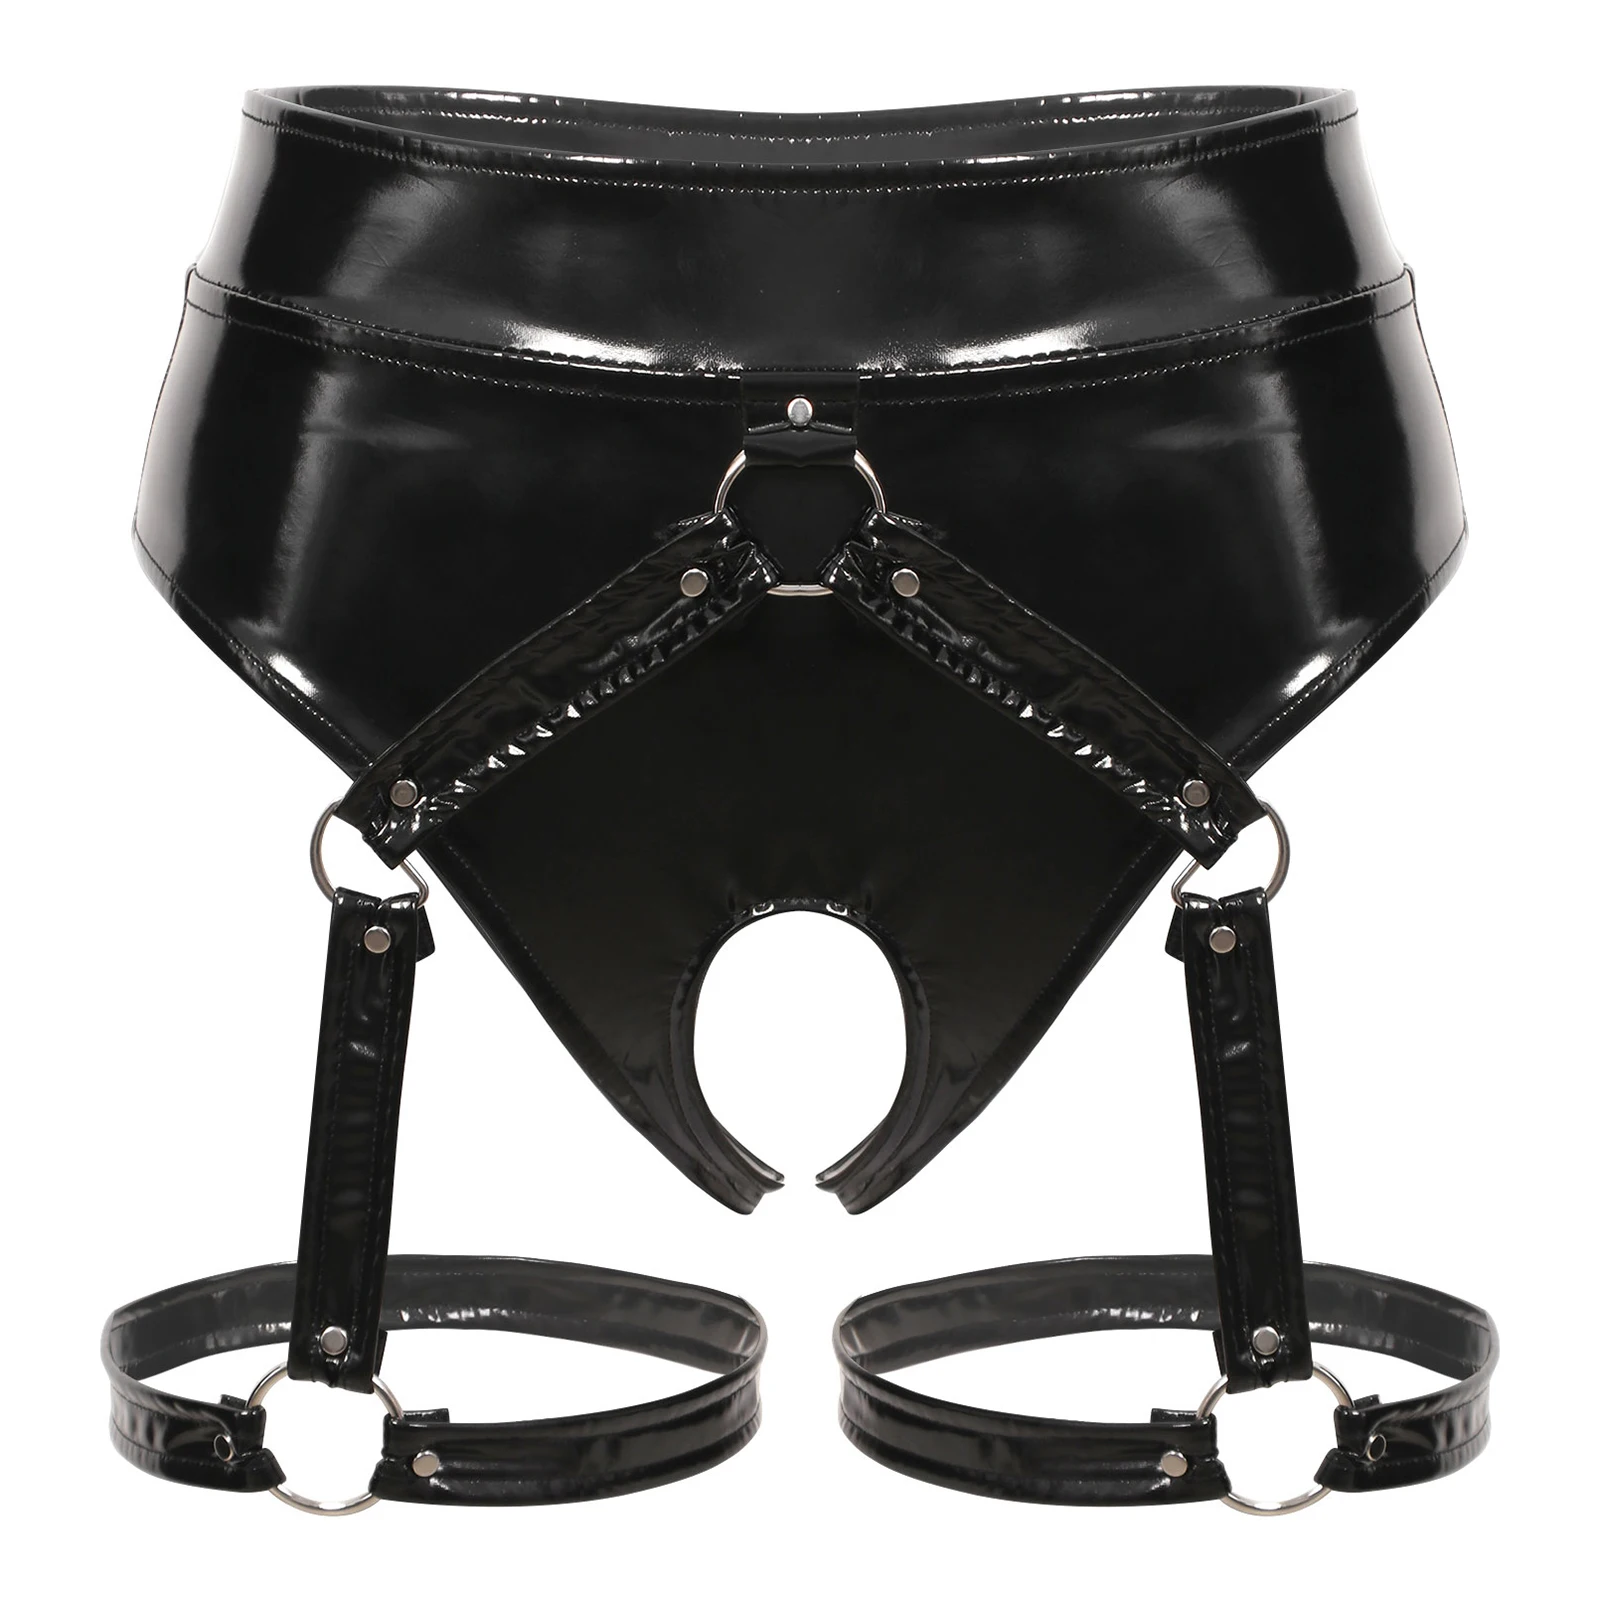 Dream about me - PVC Panties with Harnesses